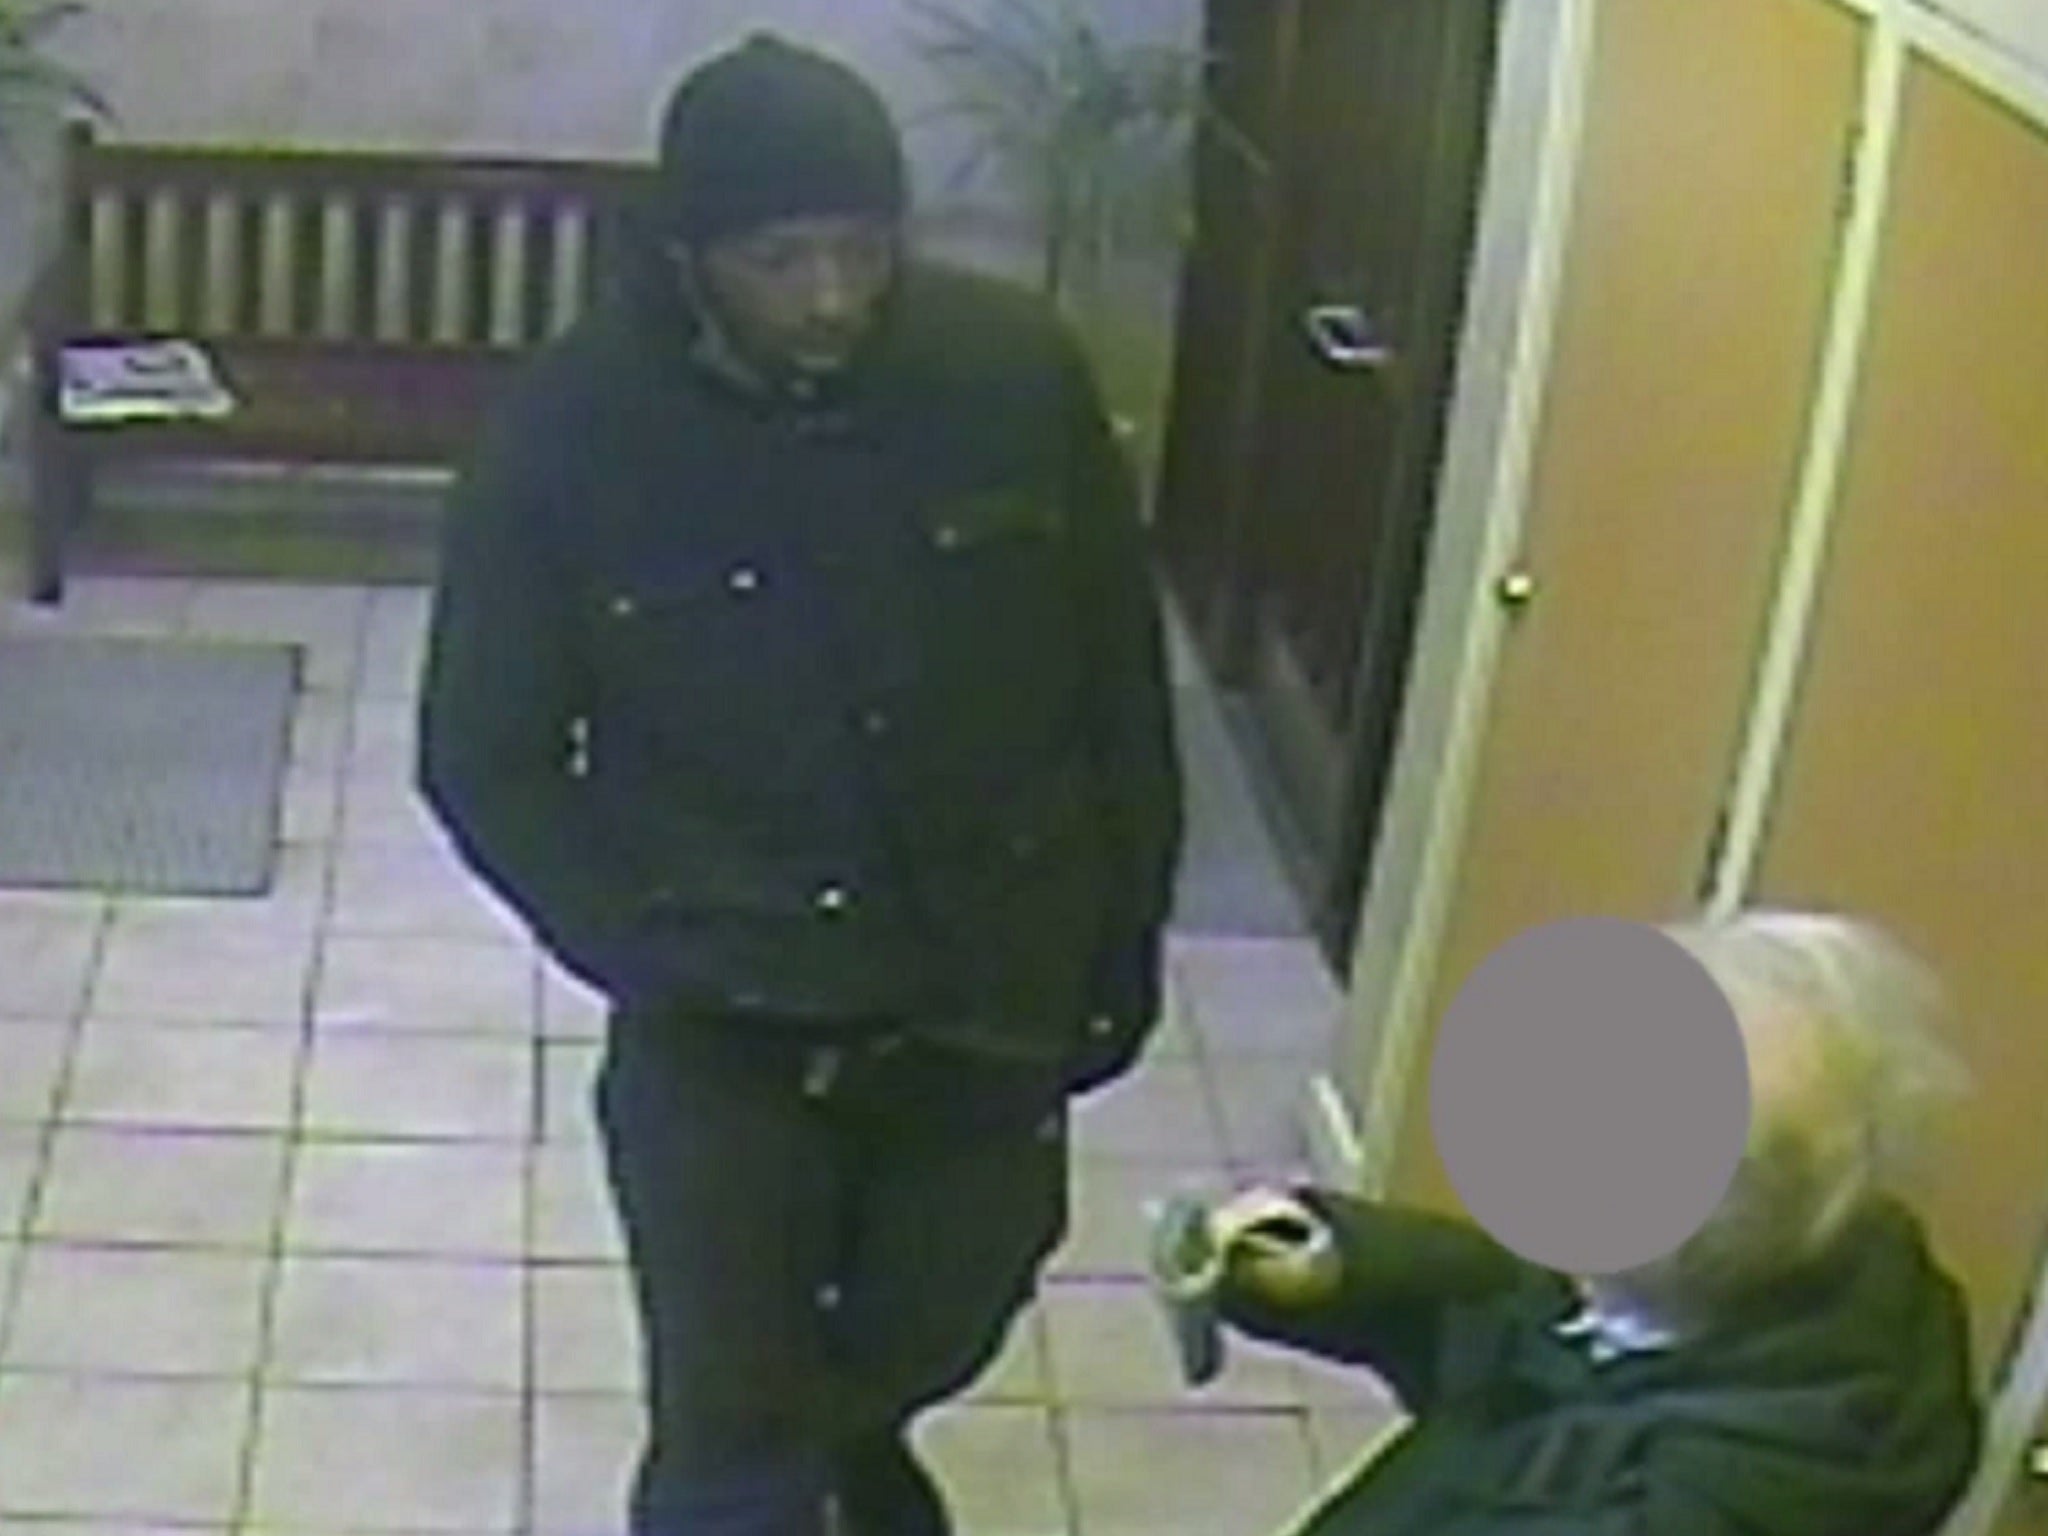 The suspect turns to rob the 92-year-old man before pushing him to the floor